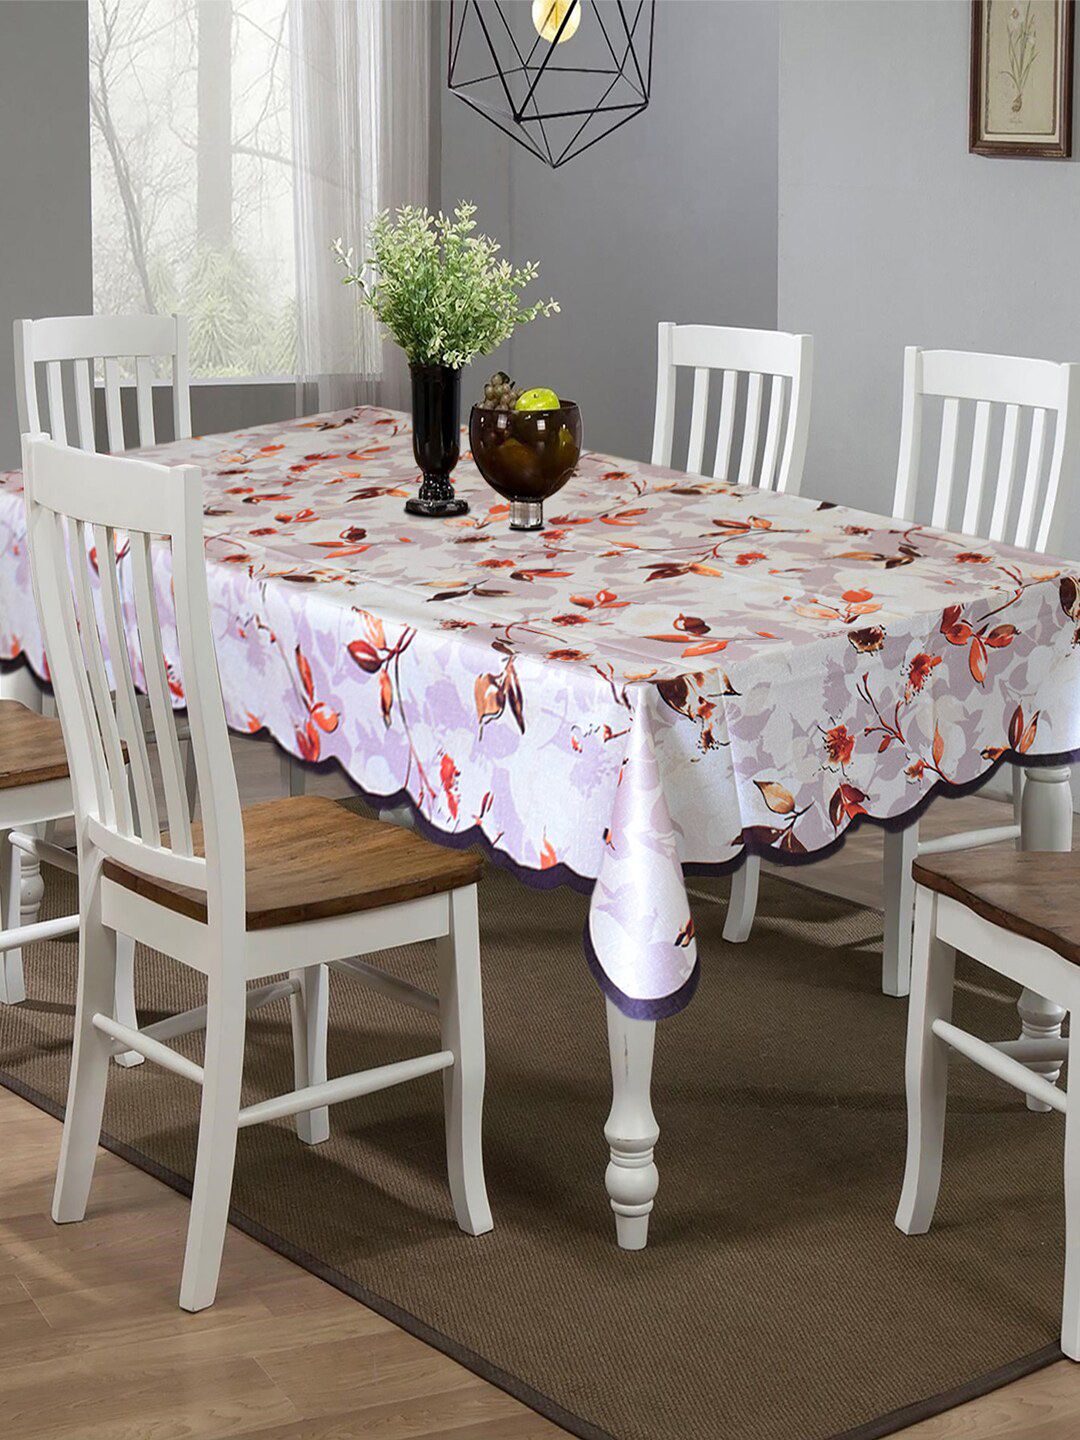 Kuber Industries Cream-Colored Printed 6 Seater Rectangular Table Cover Price in India